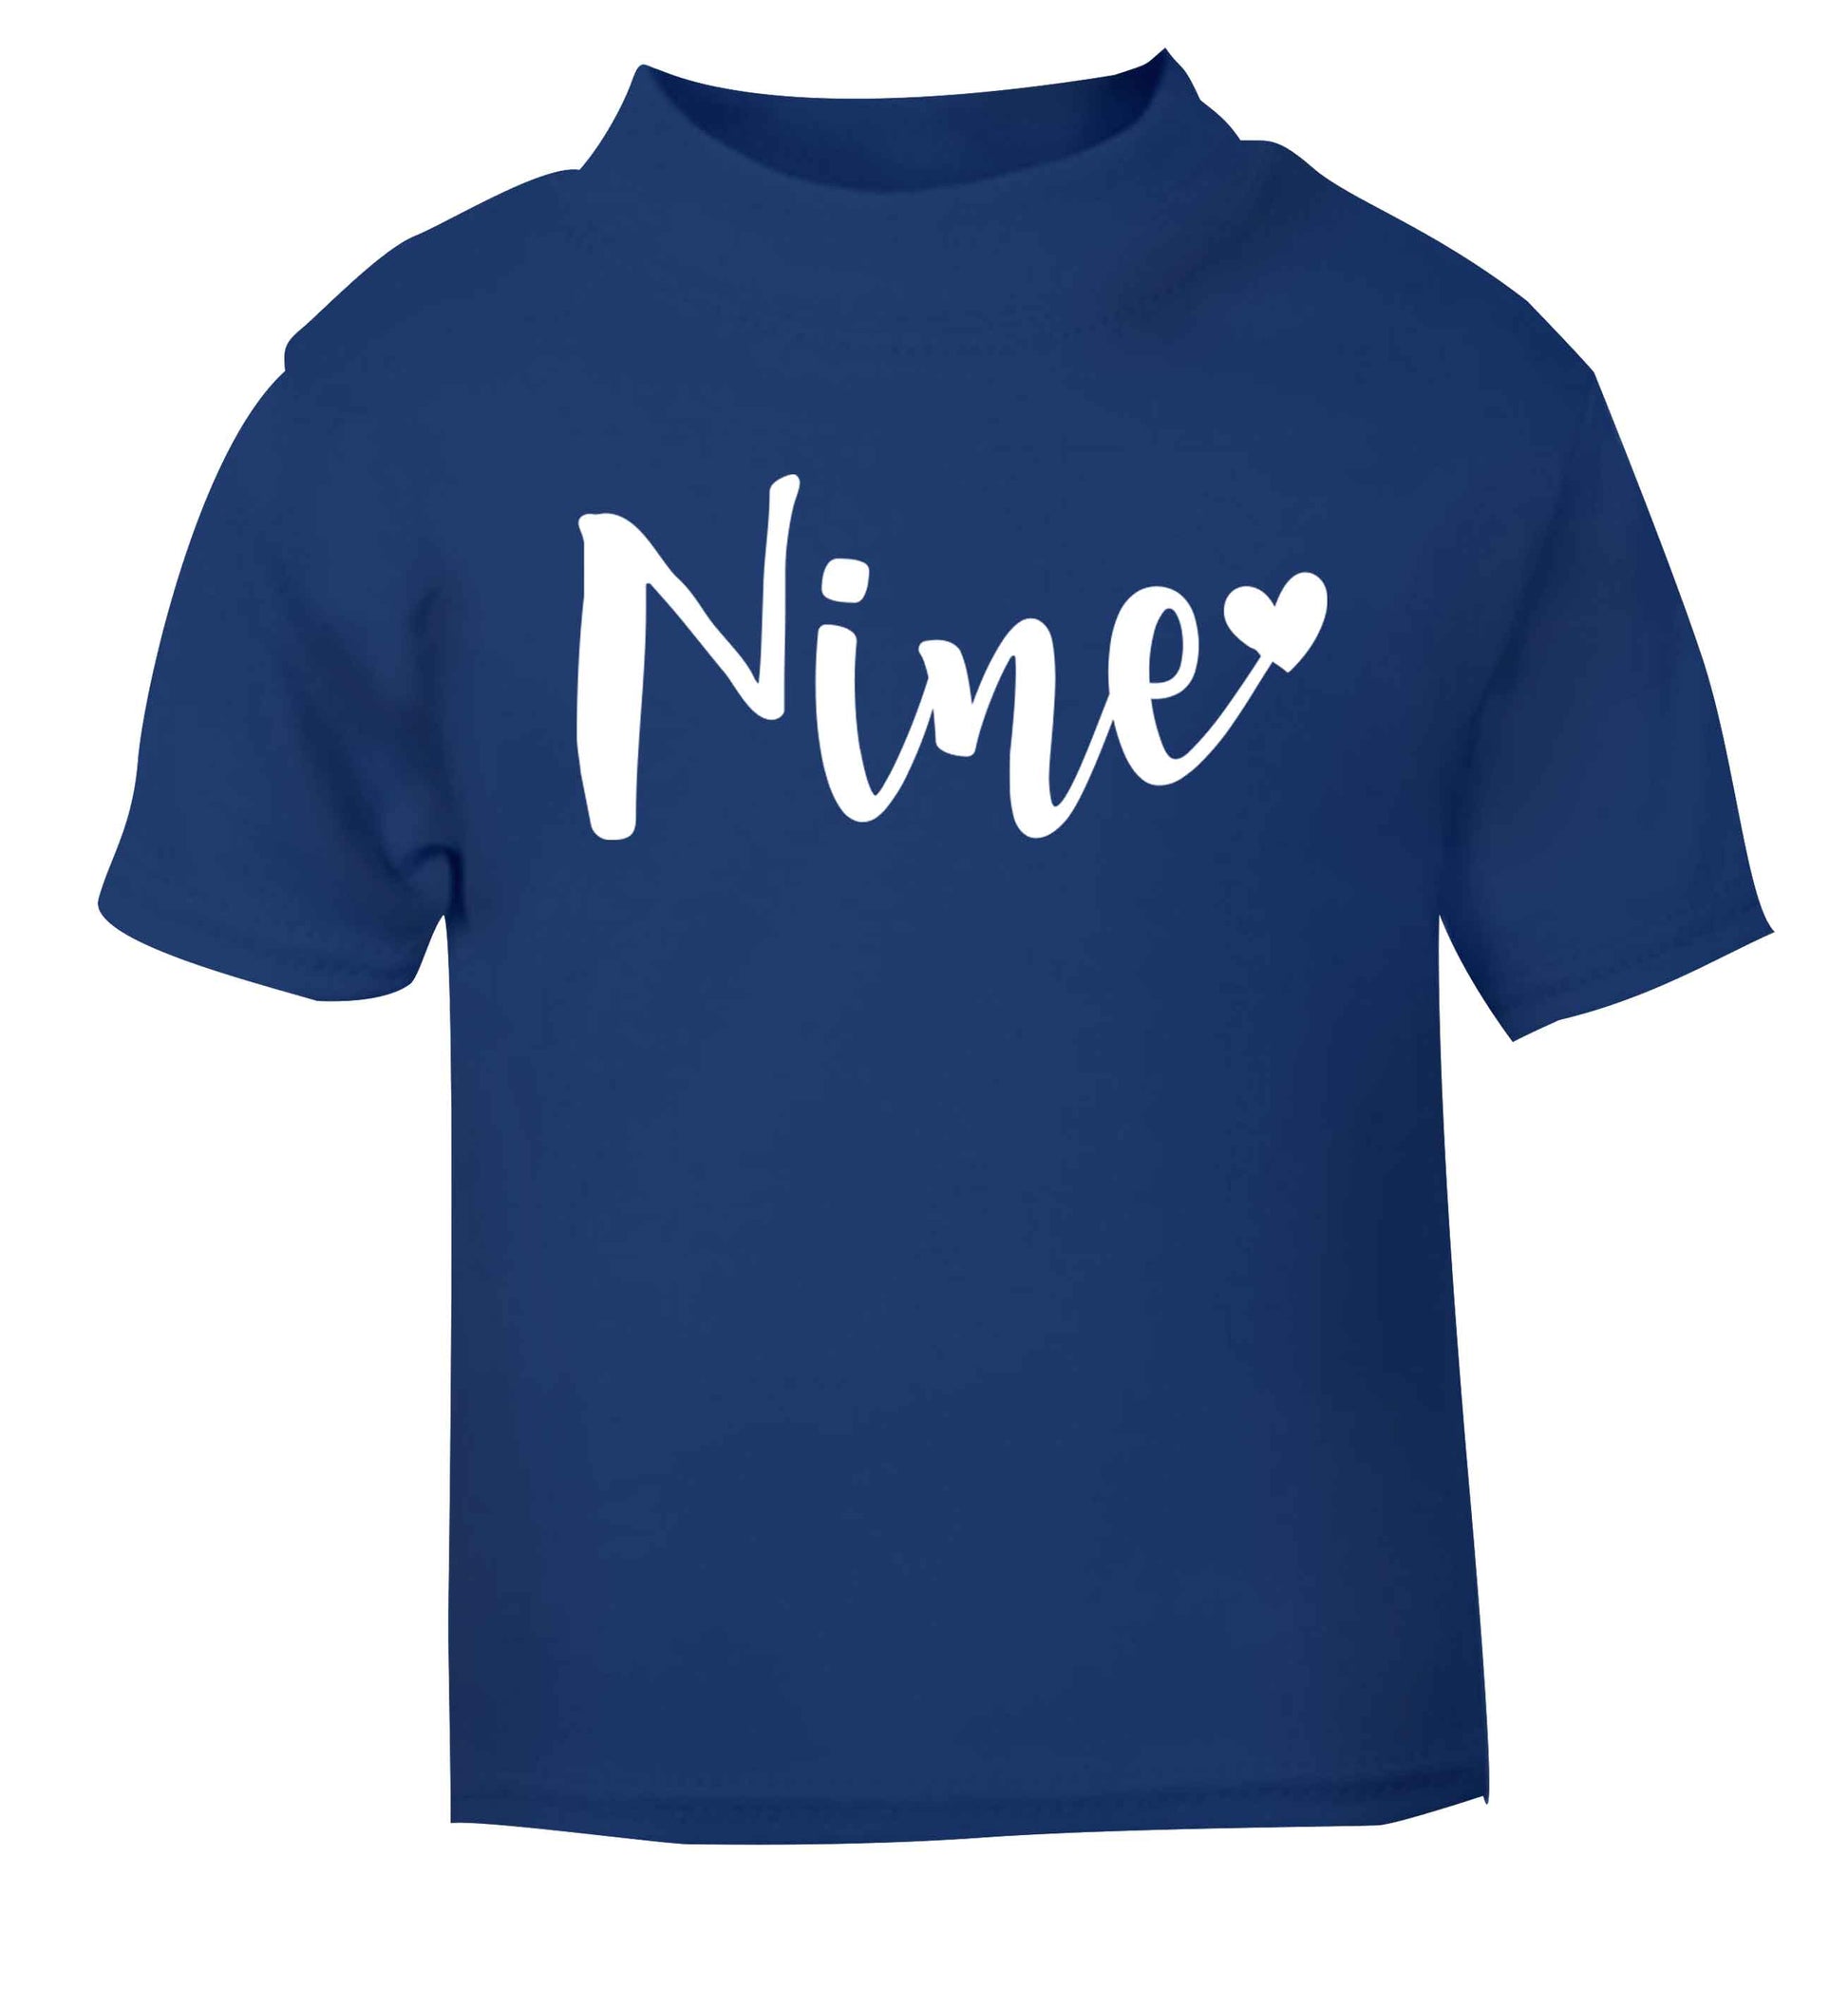 Nine and heart blue baby toddler Tshirt 2 Years